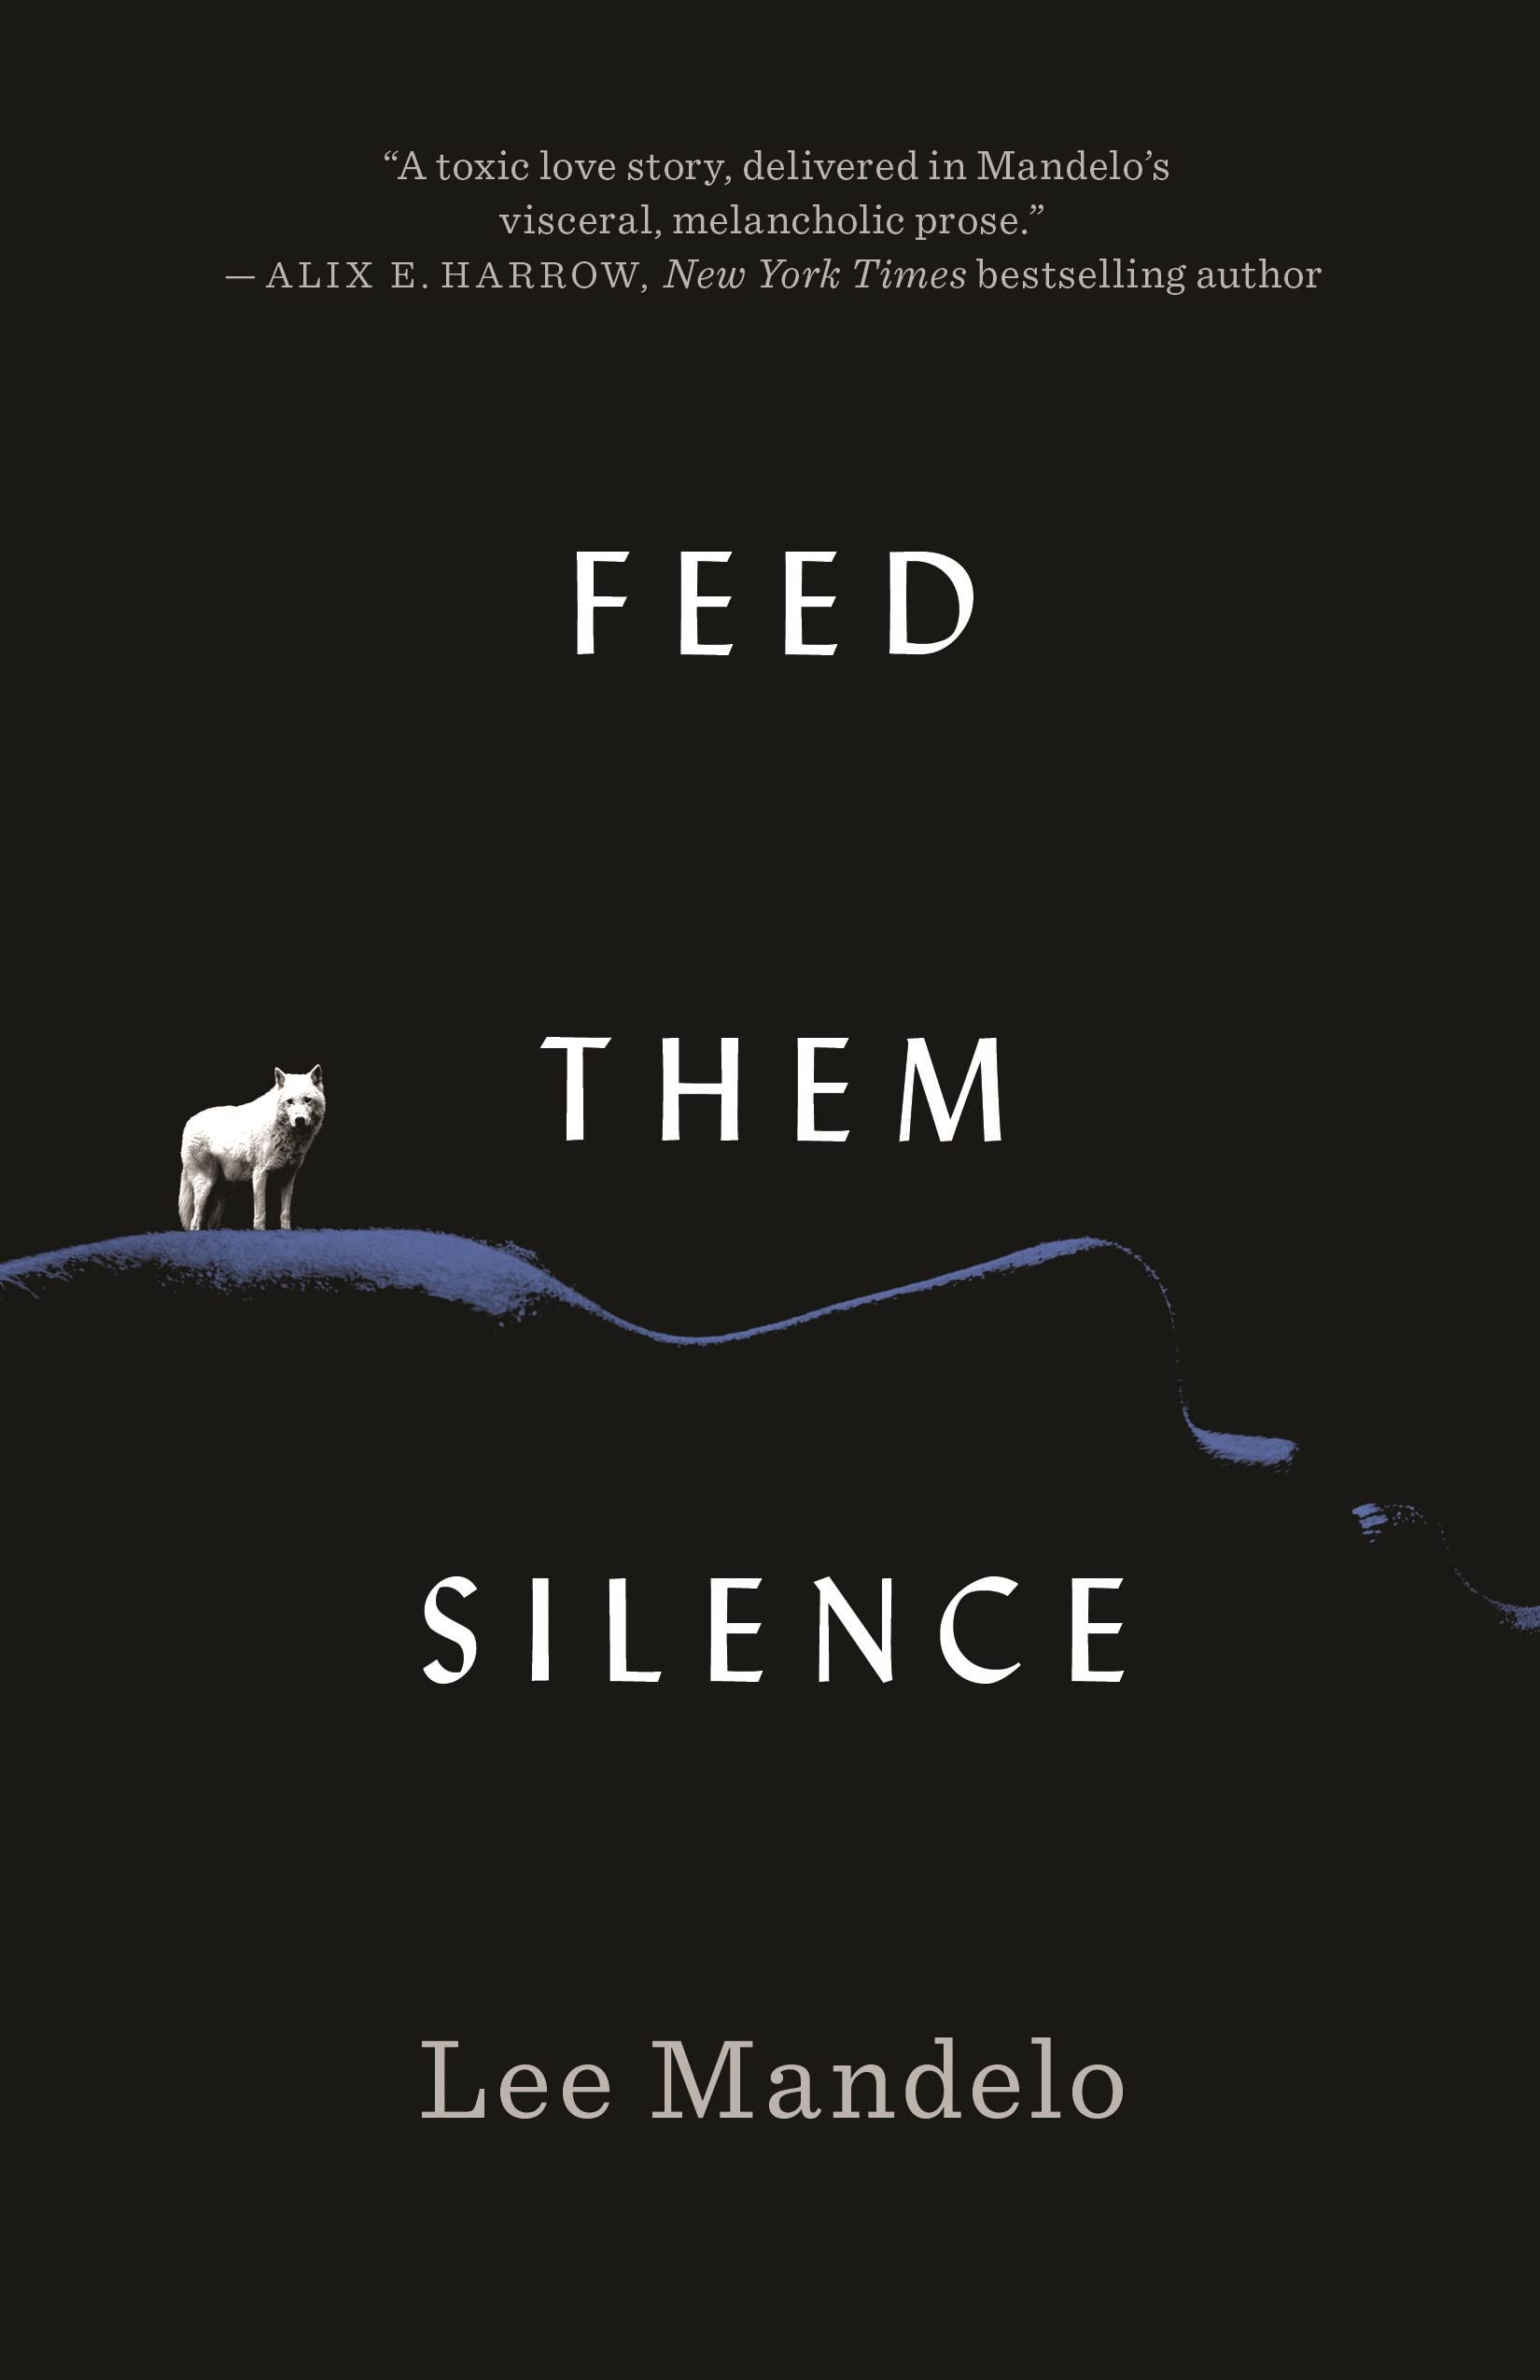 Gary K. Wolfe Reviews Feed Them Silence by Lee Mandelo – Locus Online